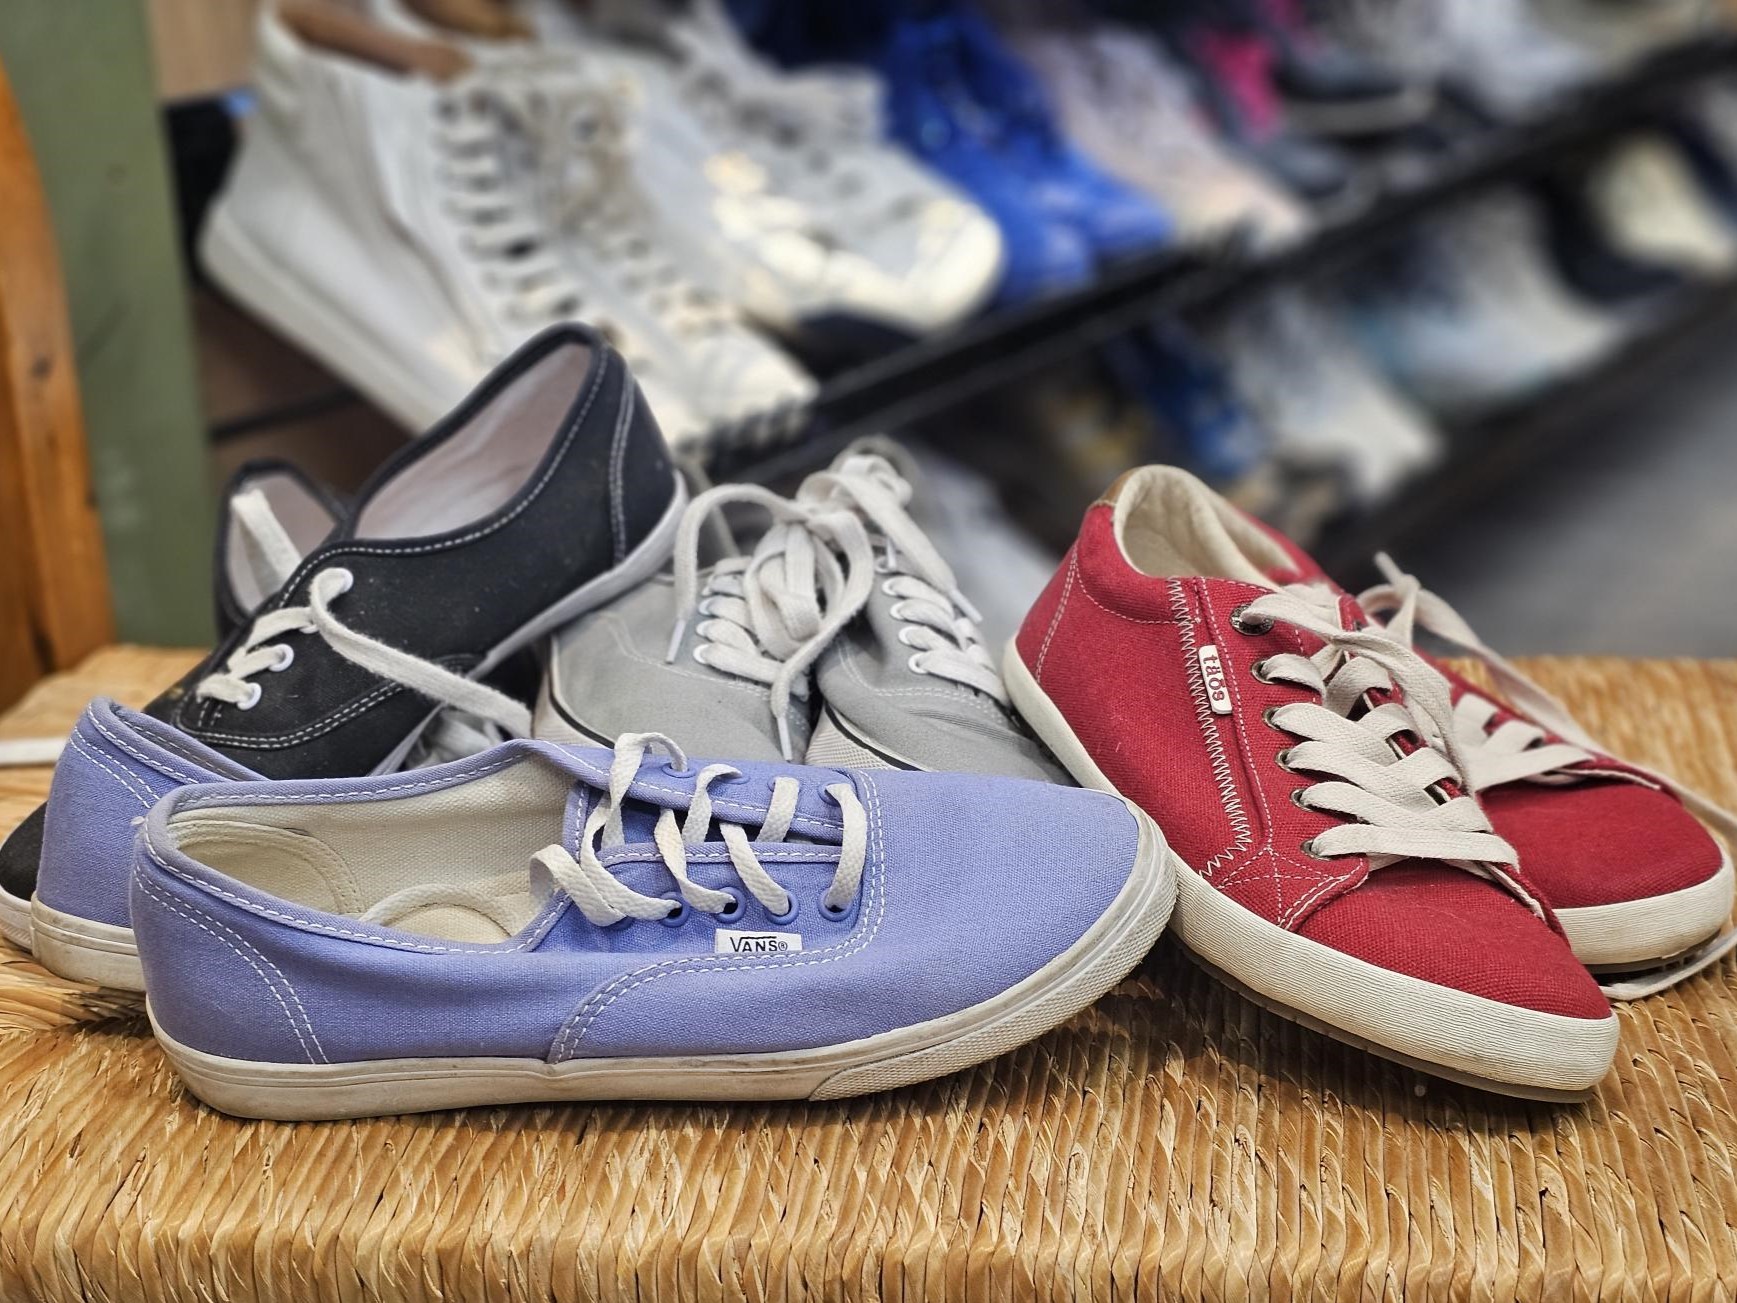 Colorful Keds and Vans sneakers GMT